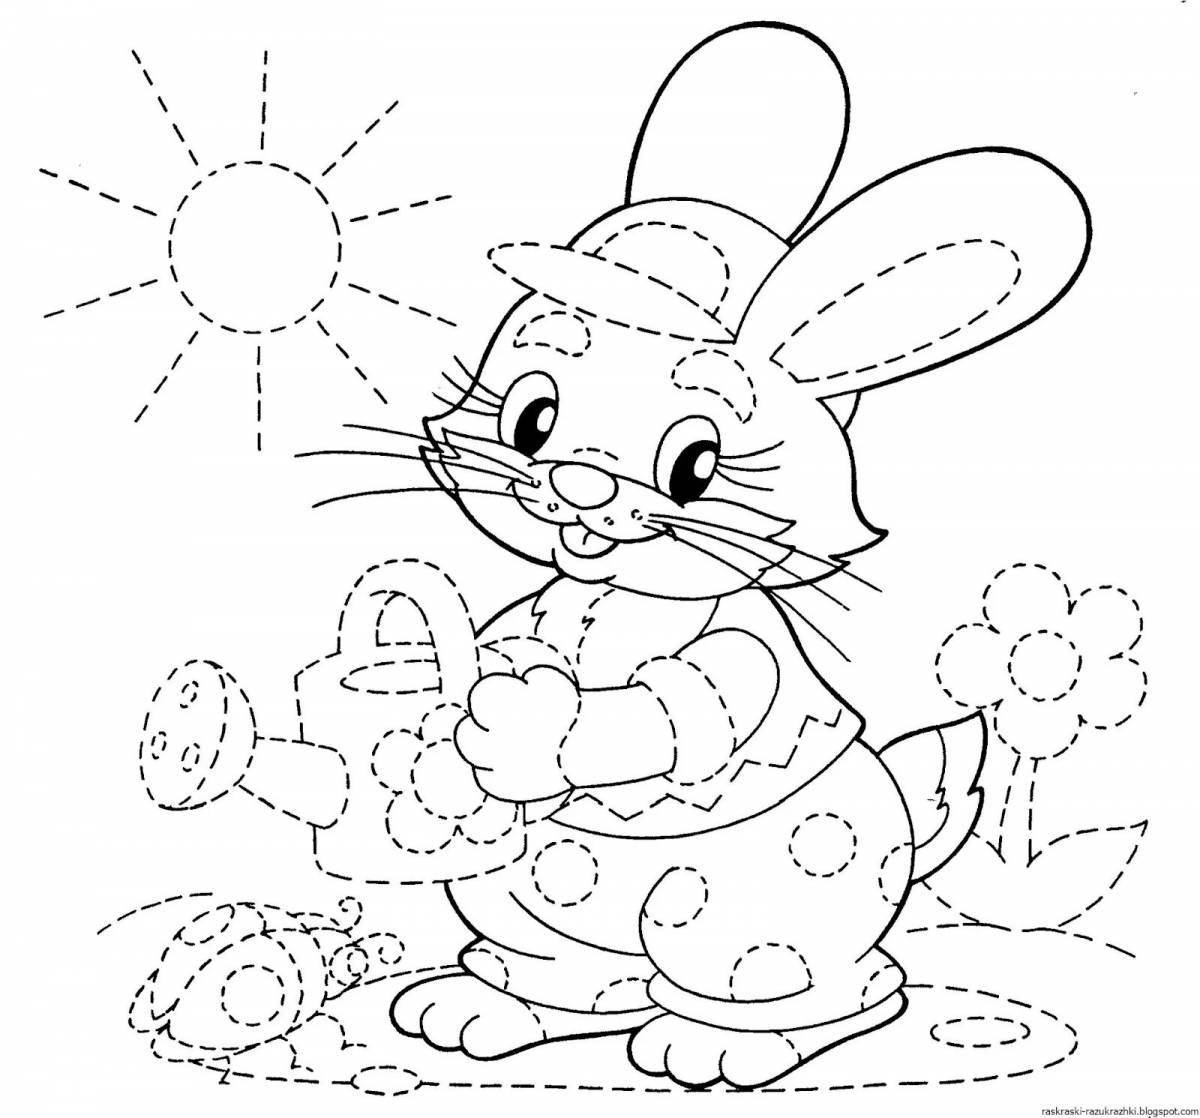 Colorful kindergarten coloring page